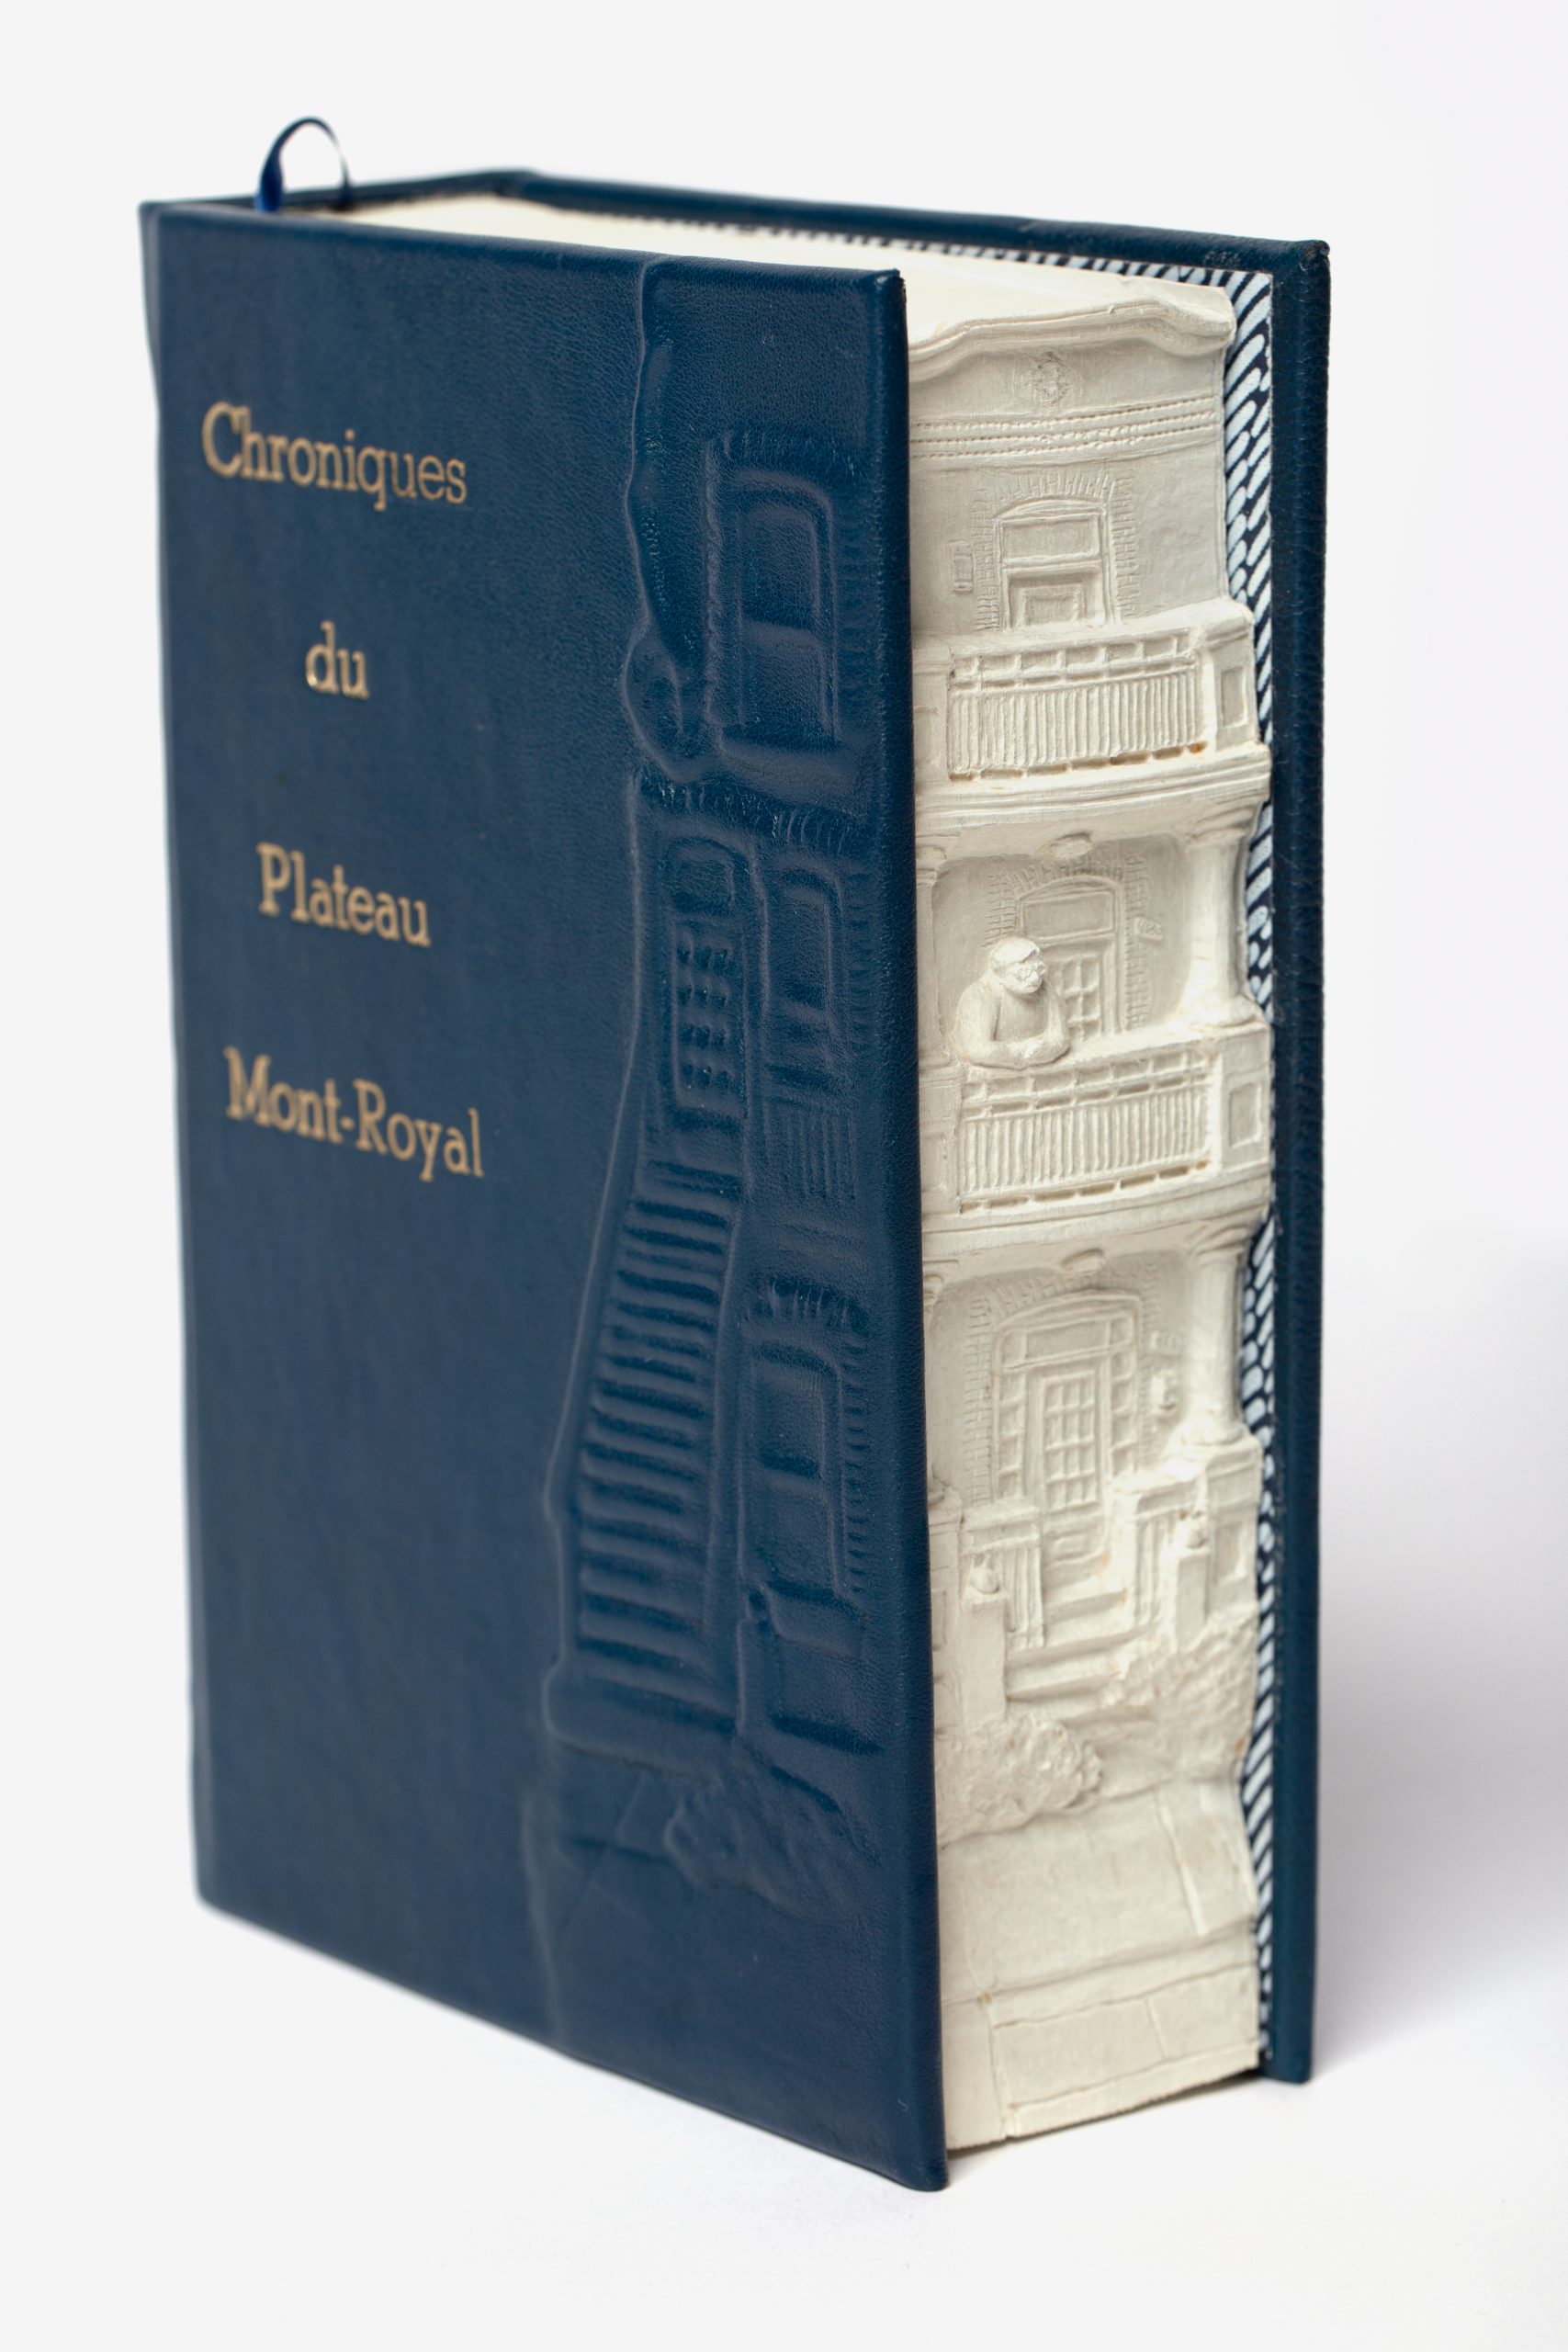 Tribute to Michel Tremblay: International exhibition of creative binding and artist’s books